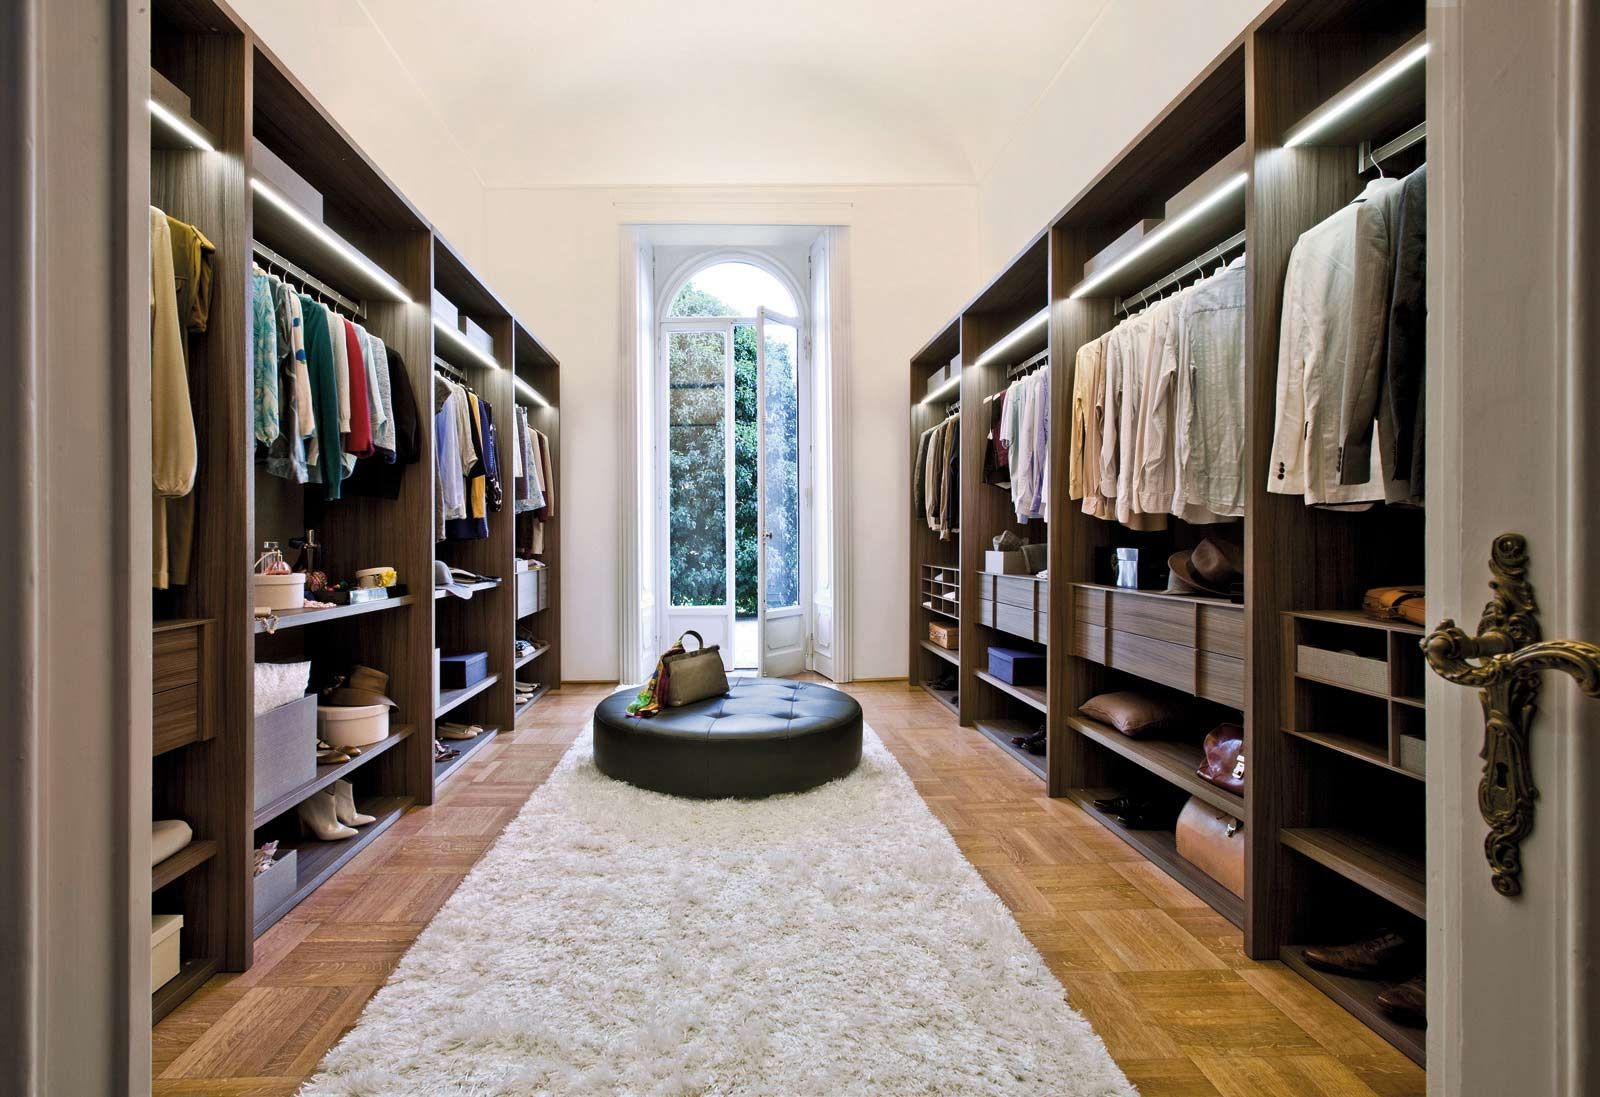 Walk In Applying Admirable Walk In Closet Ideas Applying Wooden Flooring Completed With Clothes Rack And Cabinet Lighting Also Furnished With Black Tufted Round Chair On White Soft Rug Closet Walk In Closet Ideas: Enjoying Private Collection